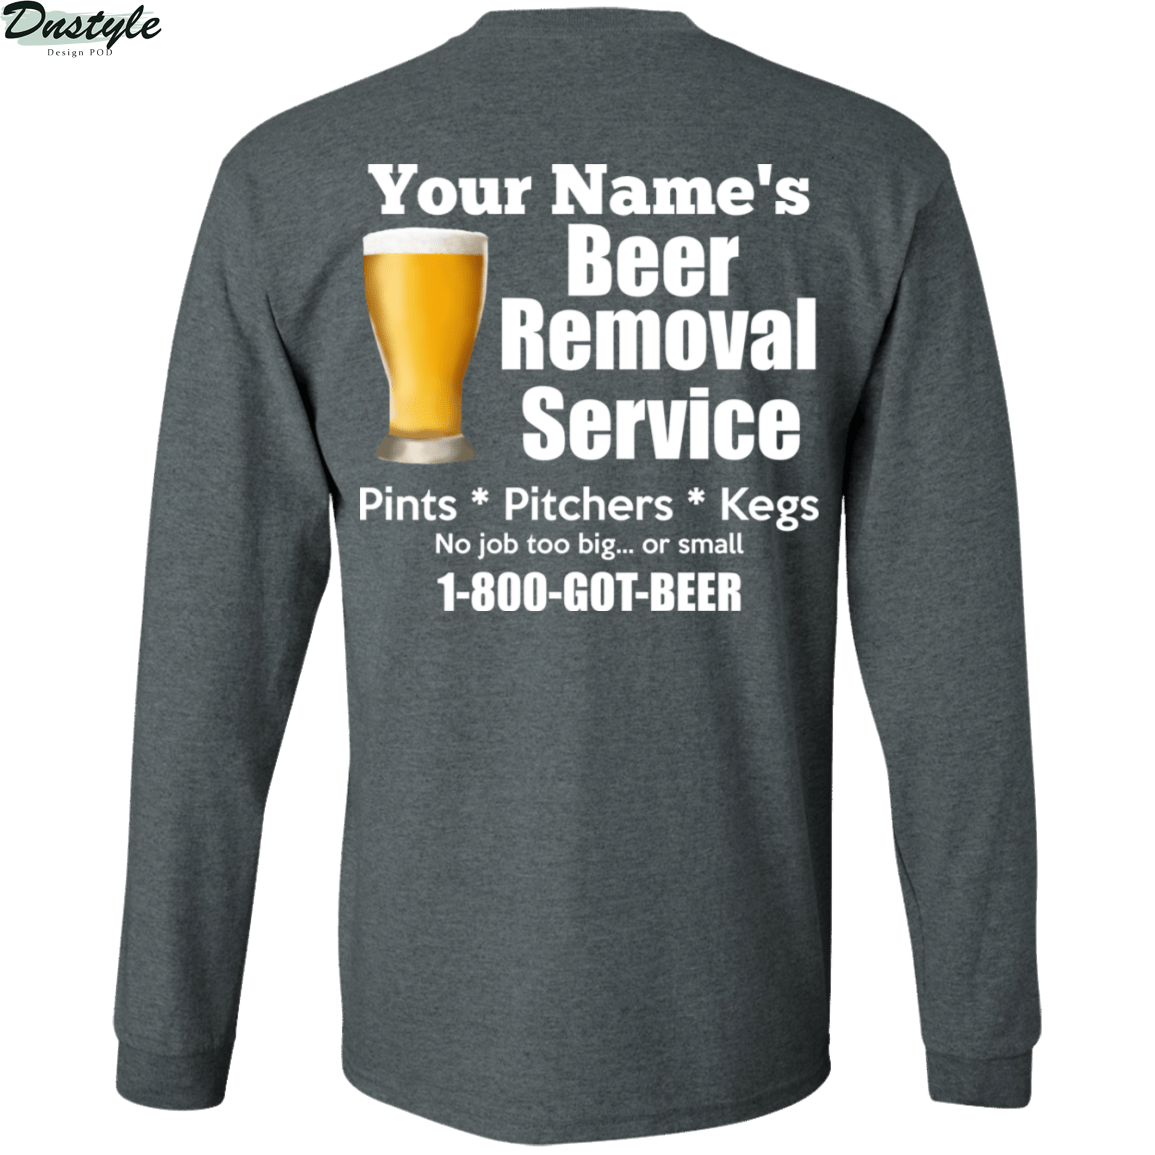 Personalized custom name beer removal service pints pitchers kegs shirt 2